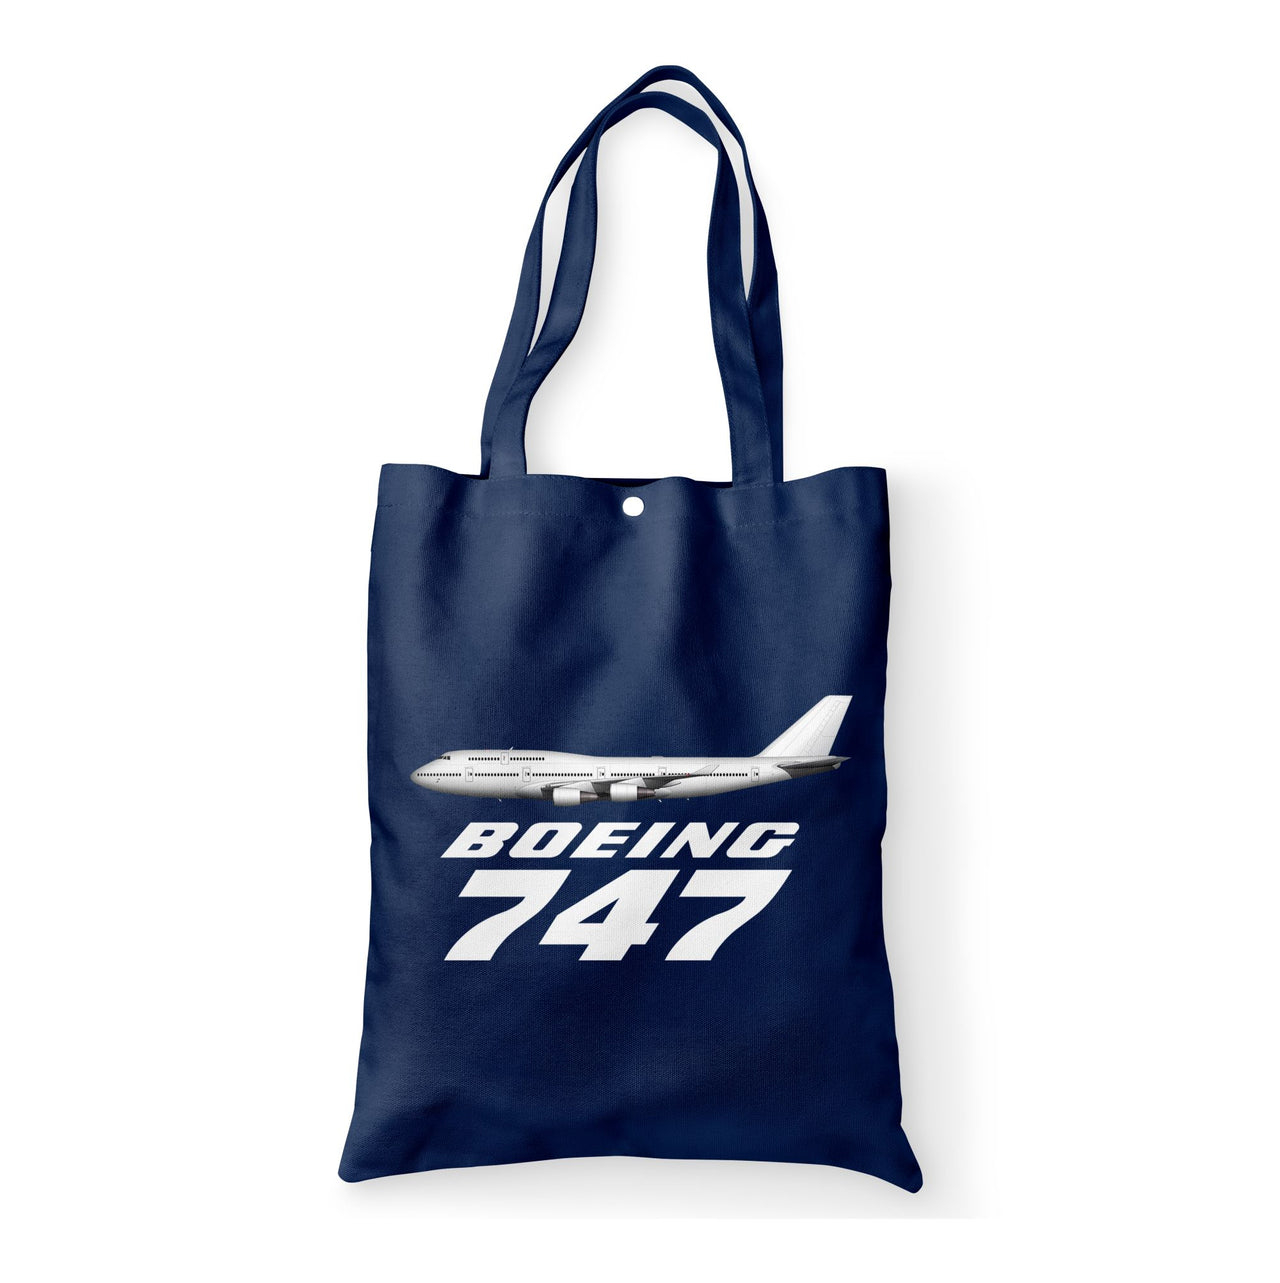 The Boeing 747 Designed Tote Bags